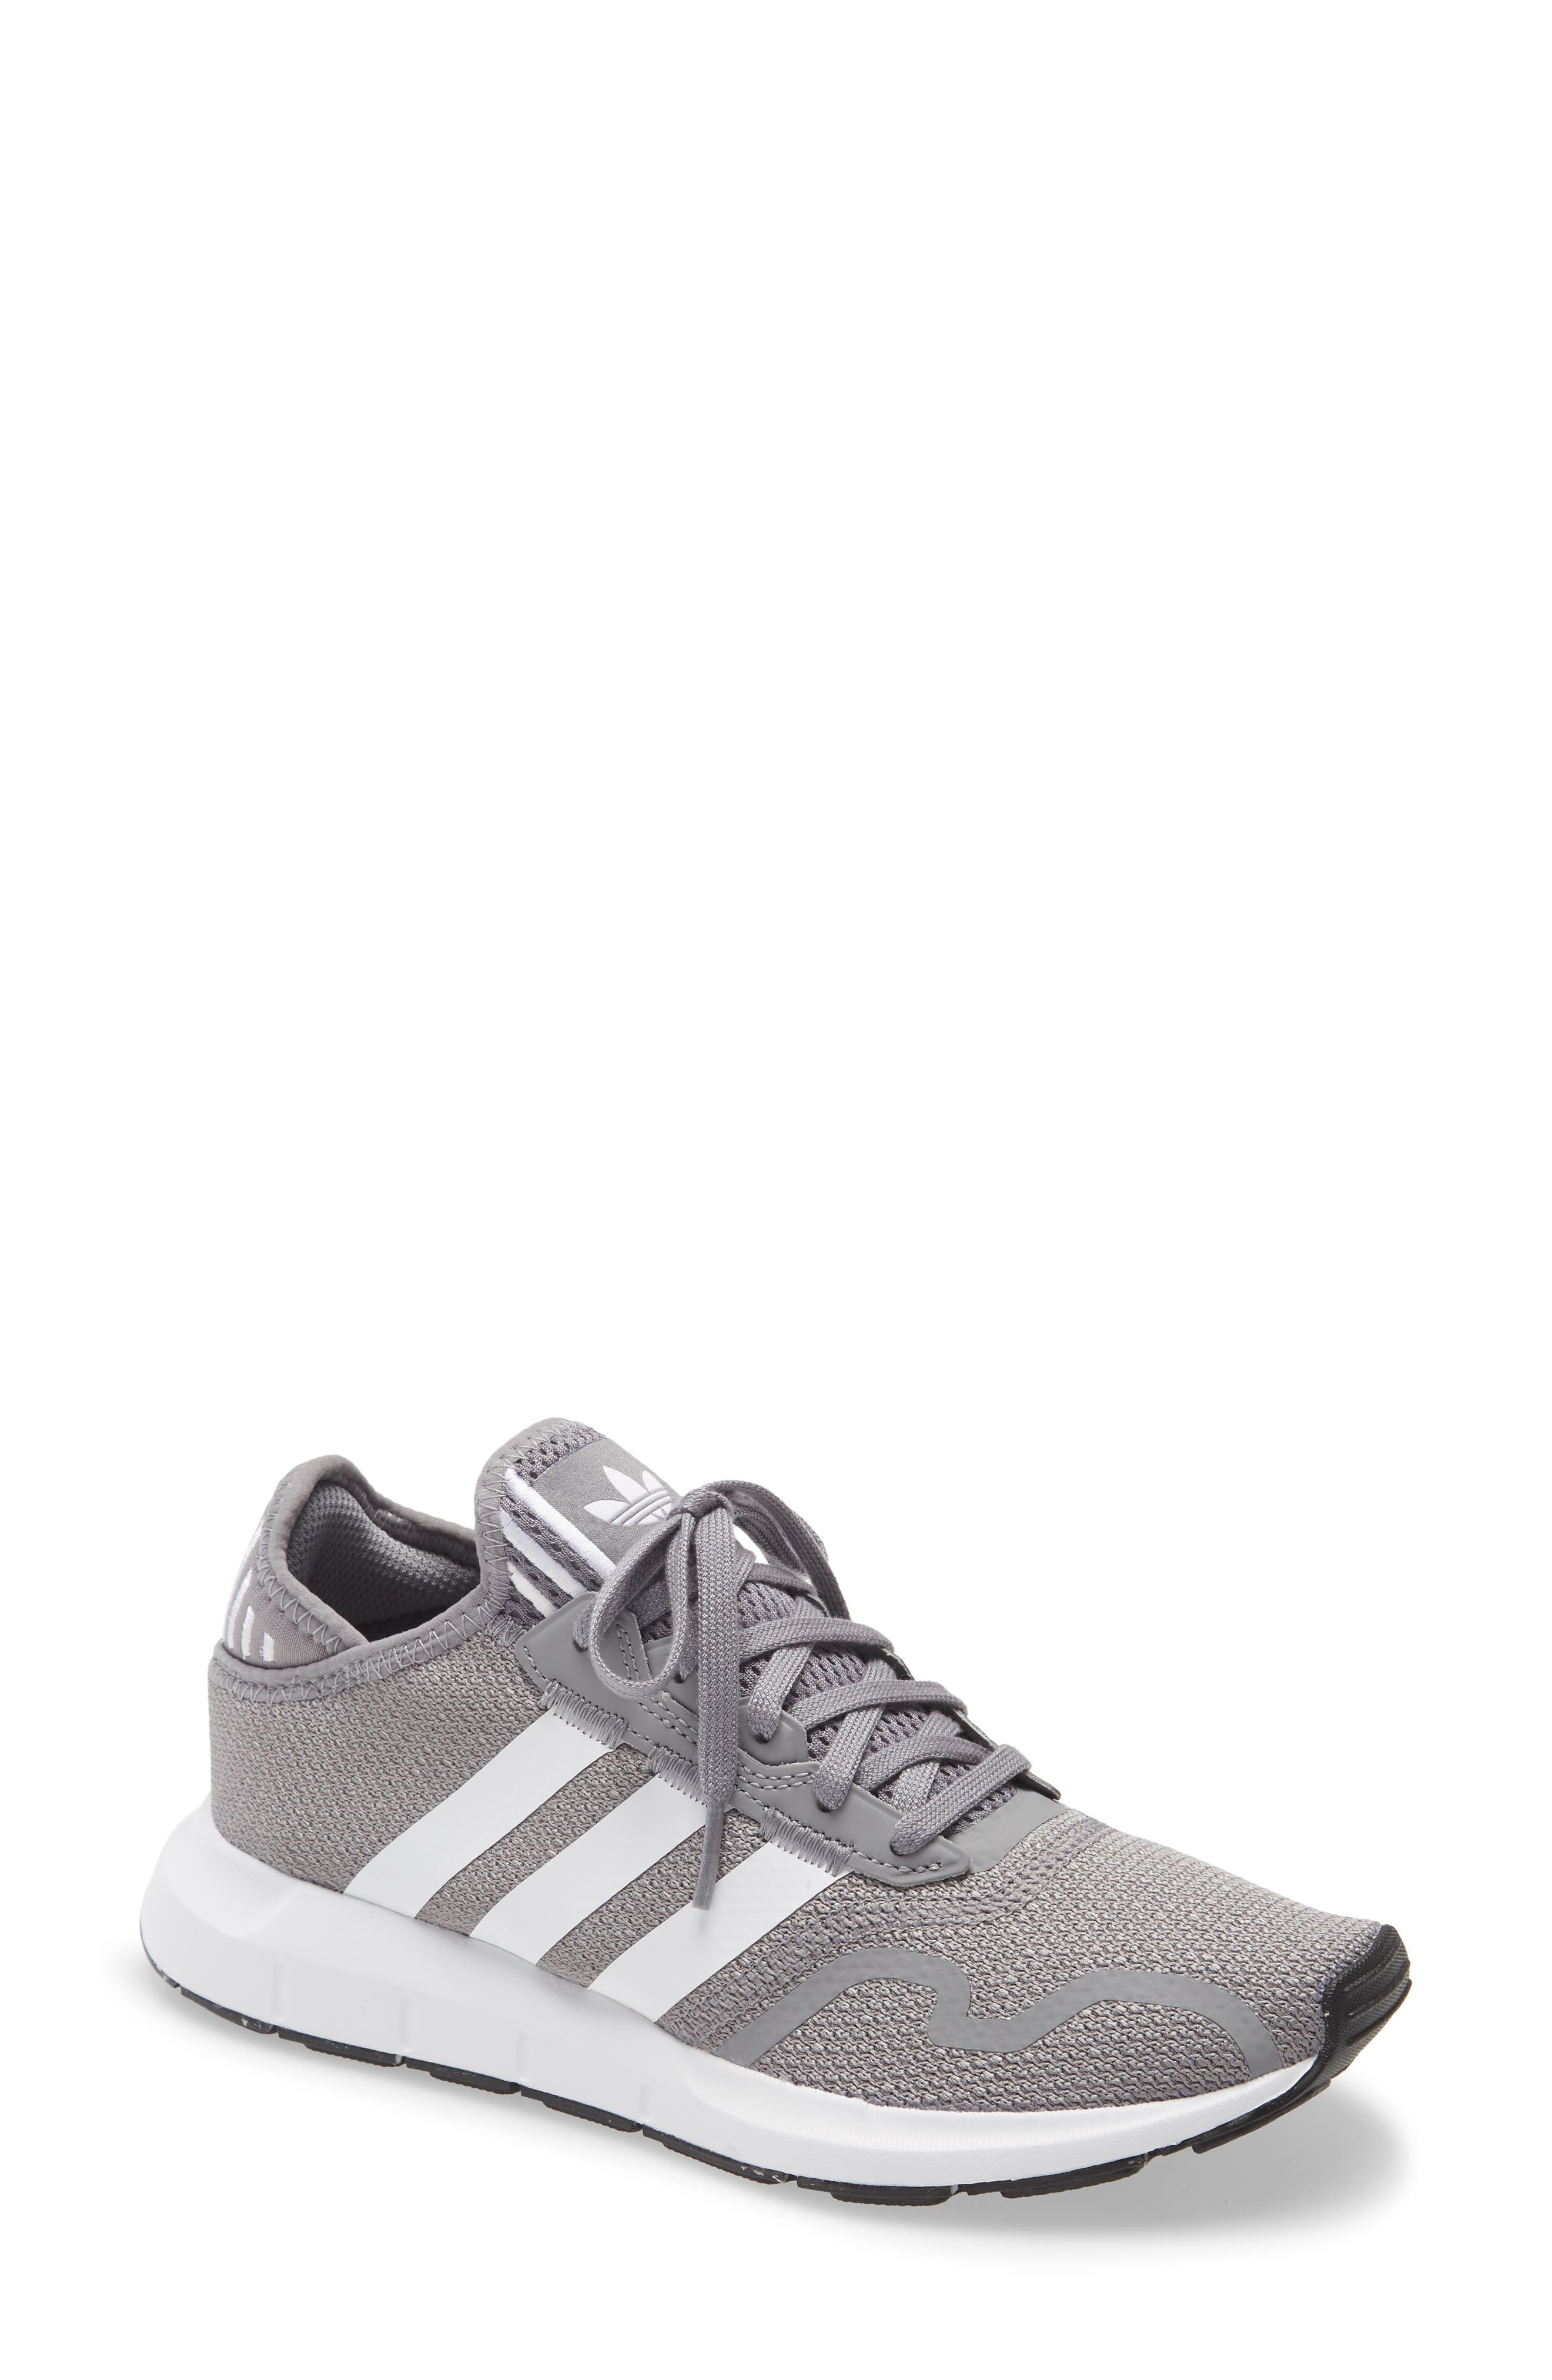 Kids' adidas Shoes | Nordstrom